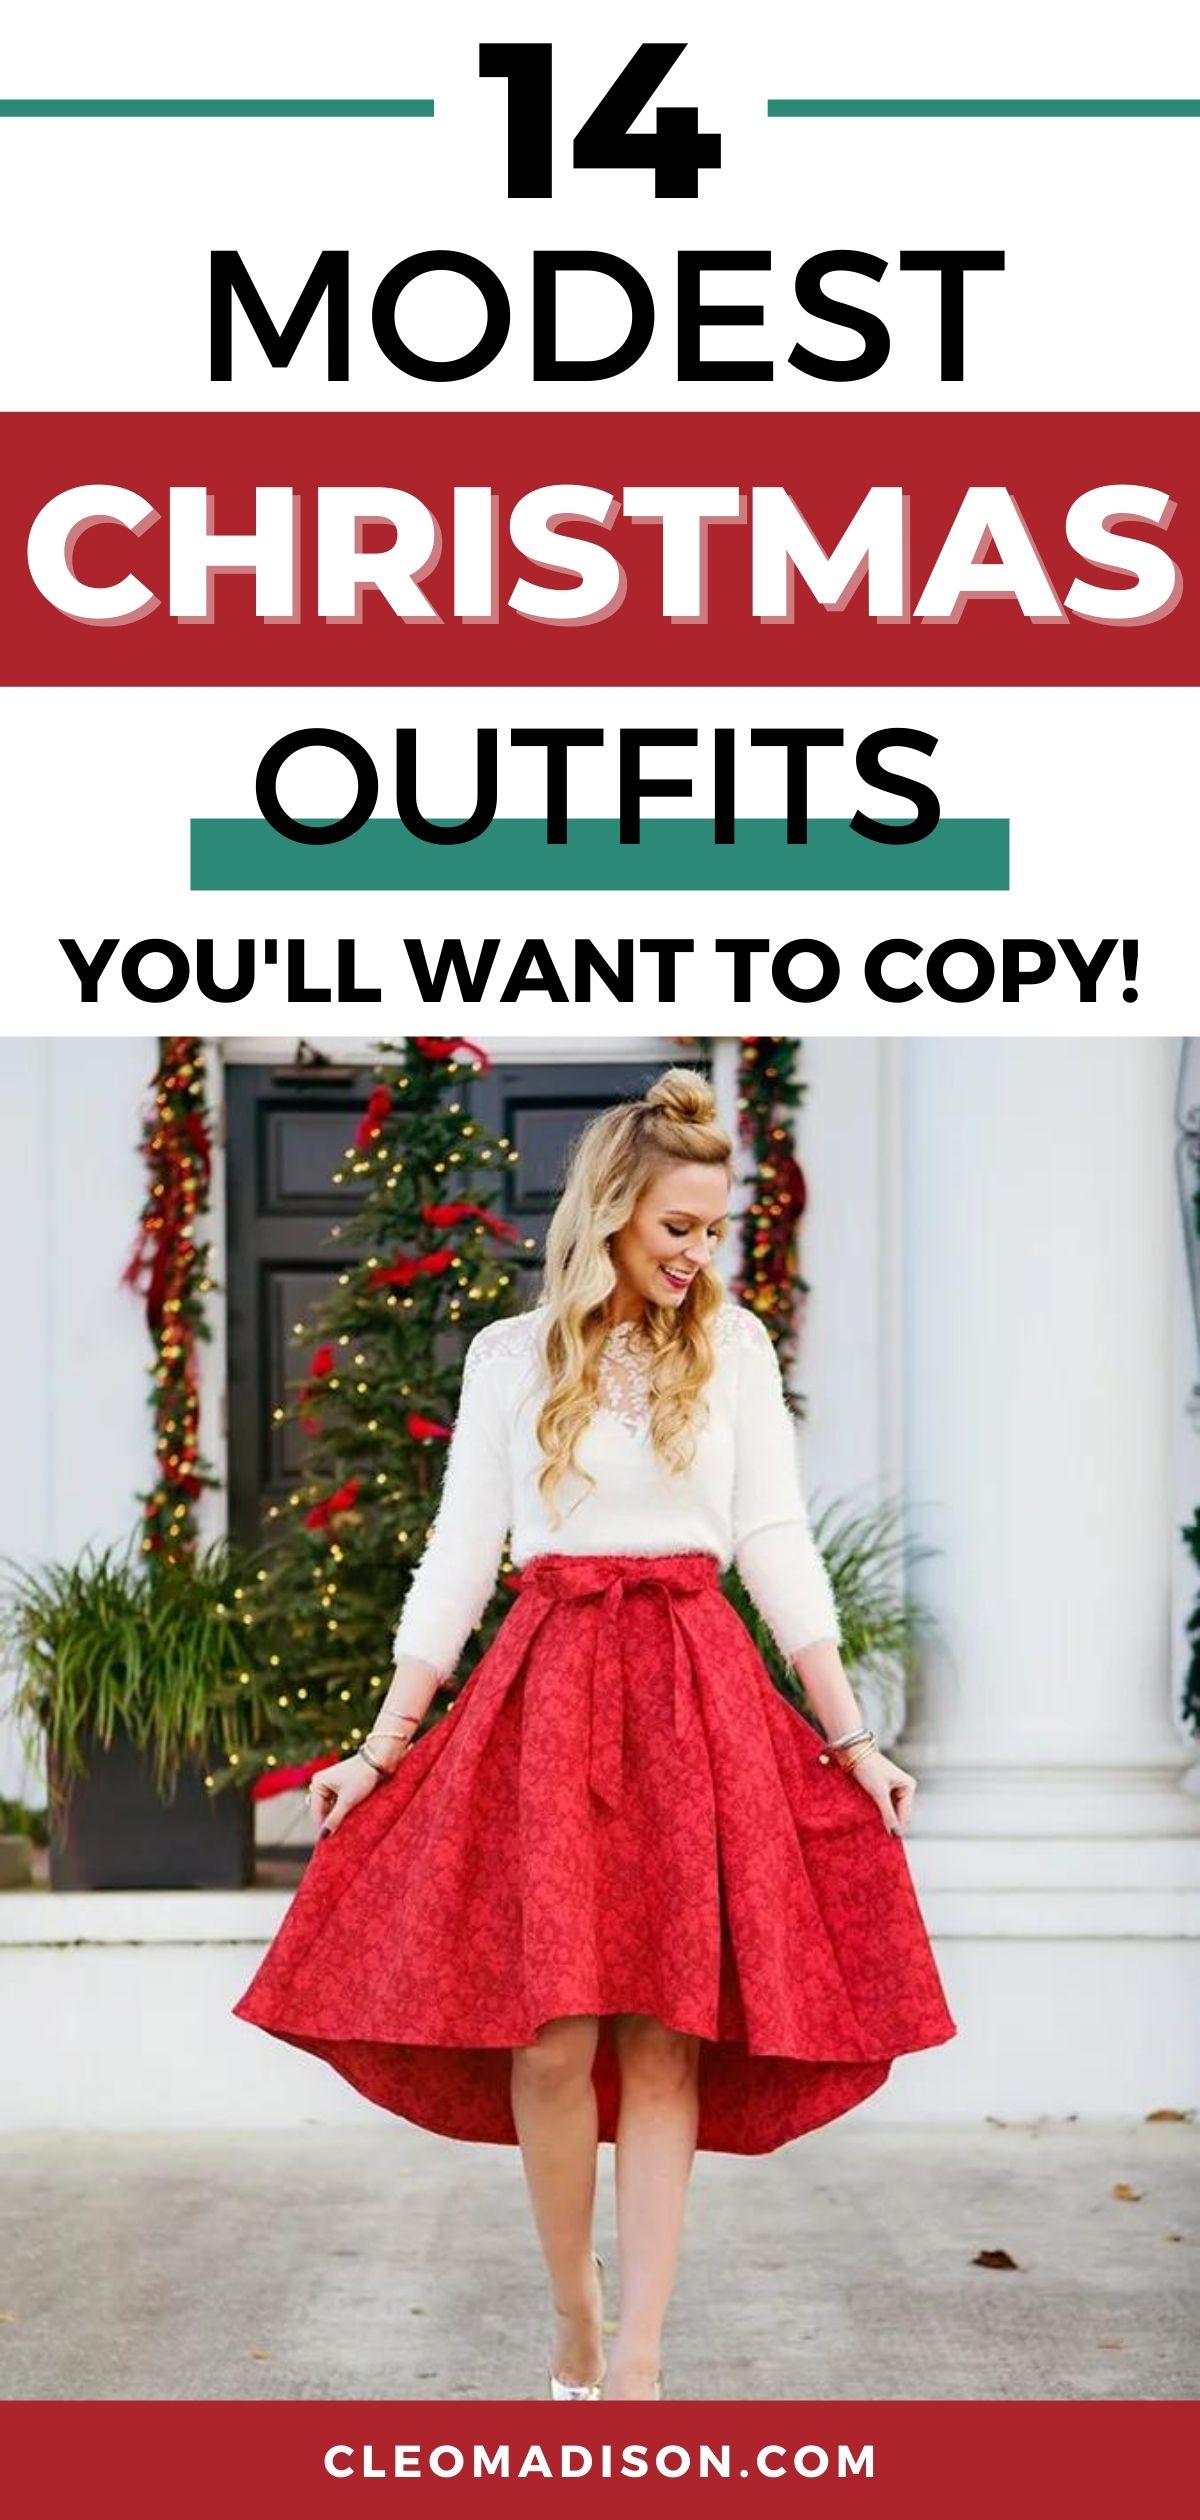 modest holiday outfits